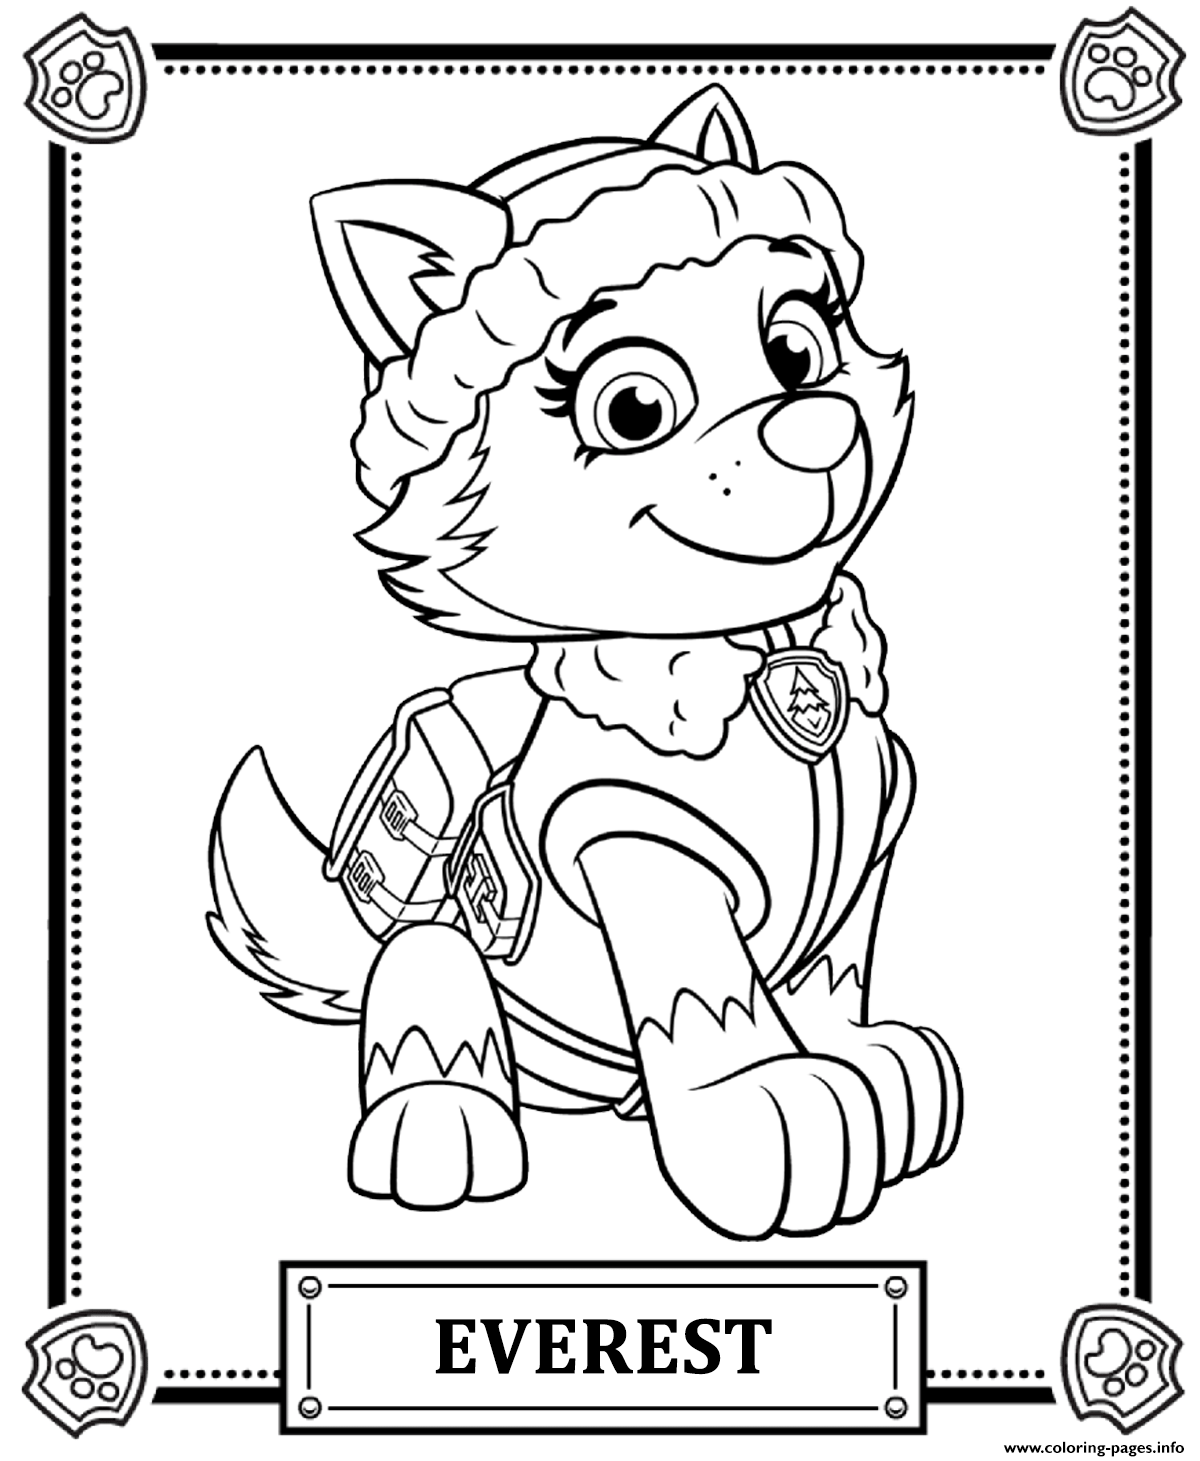 Paw Patrol Everest coloring